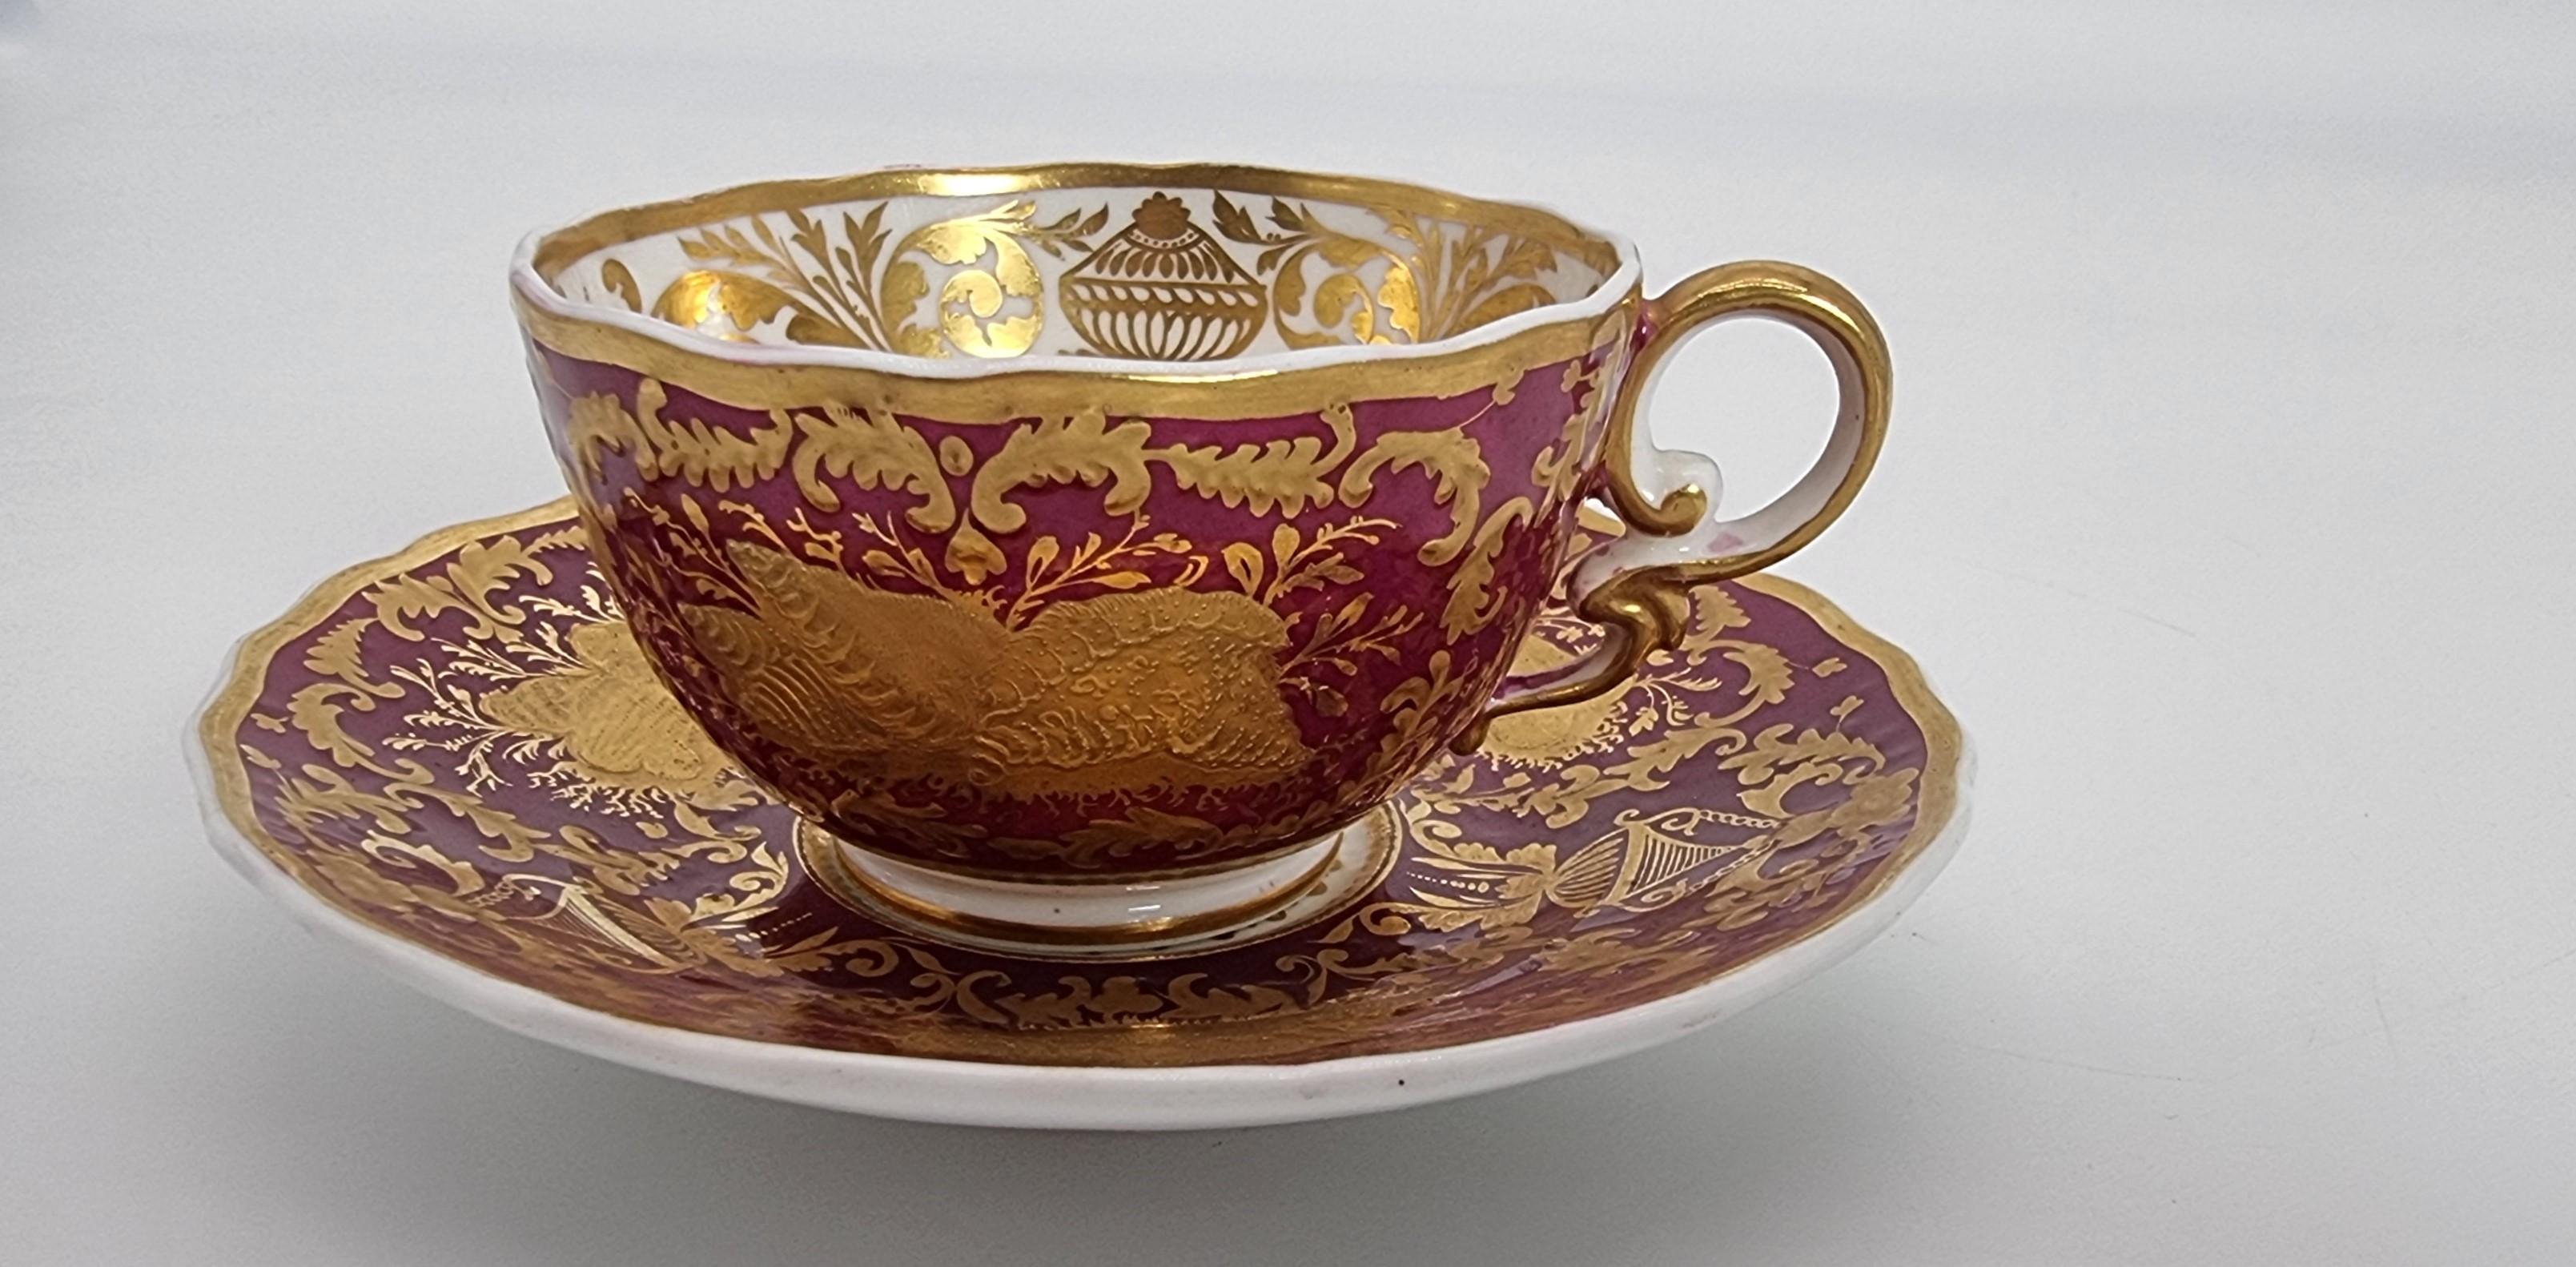 An exquisite and rare early 19t C Spode cabinet cup and saucer circa 1830 For Sale 11